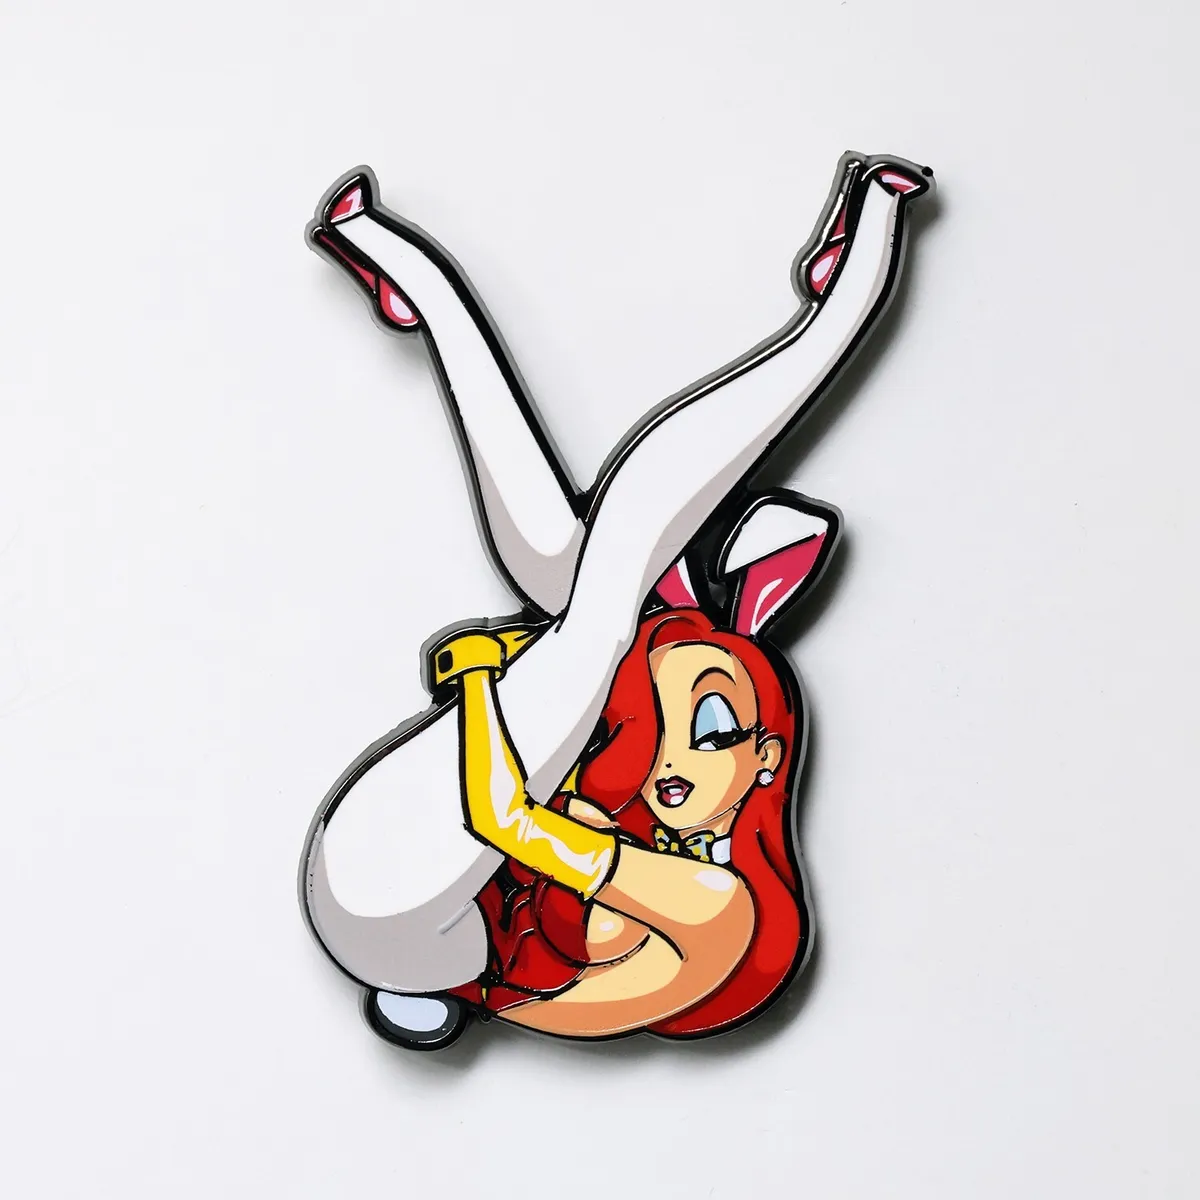 amalia rizki recommends Pictures Of Jessica Rabbit And Roger Rabbit